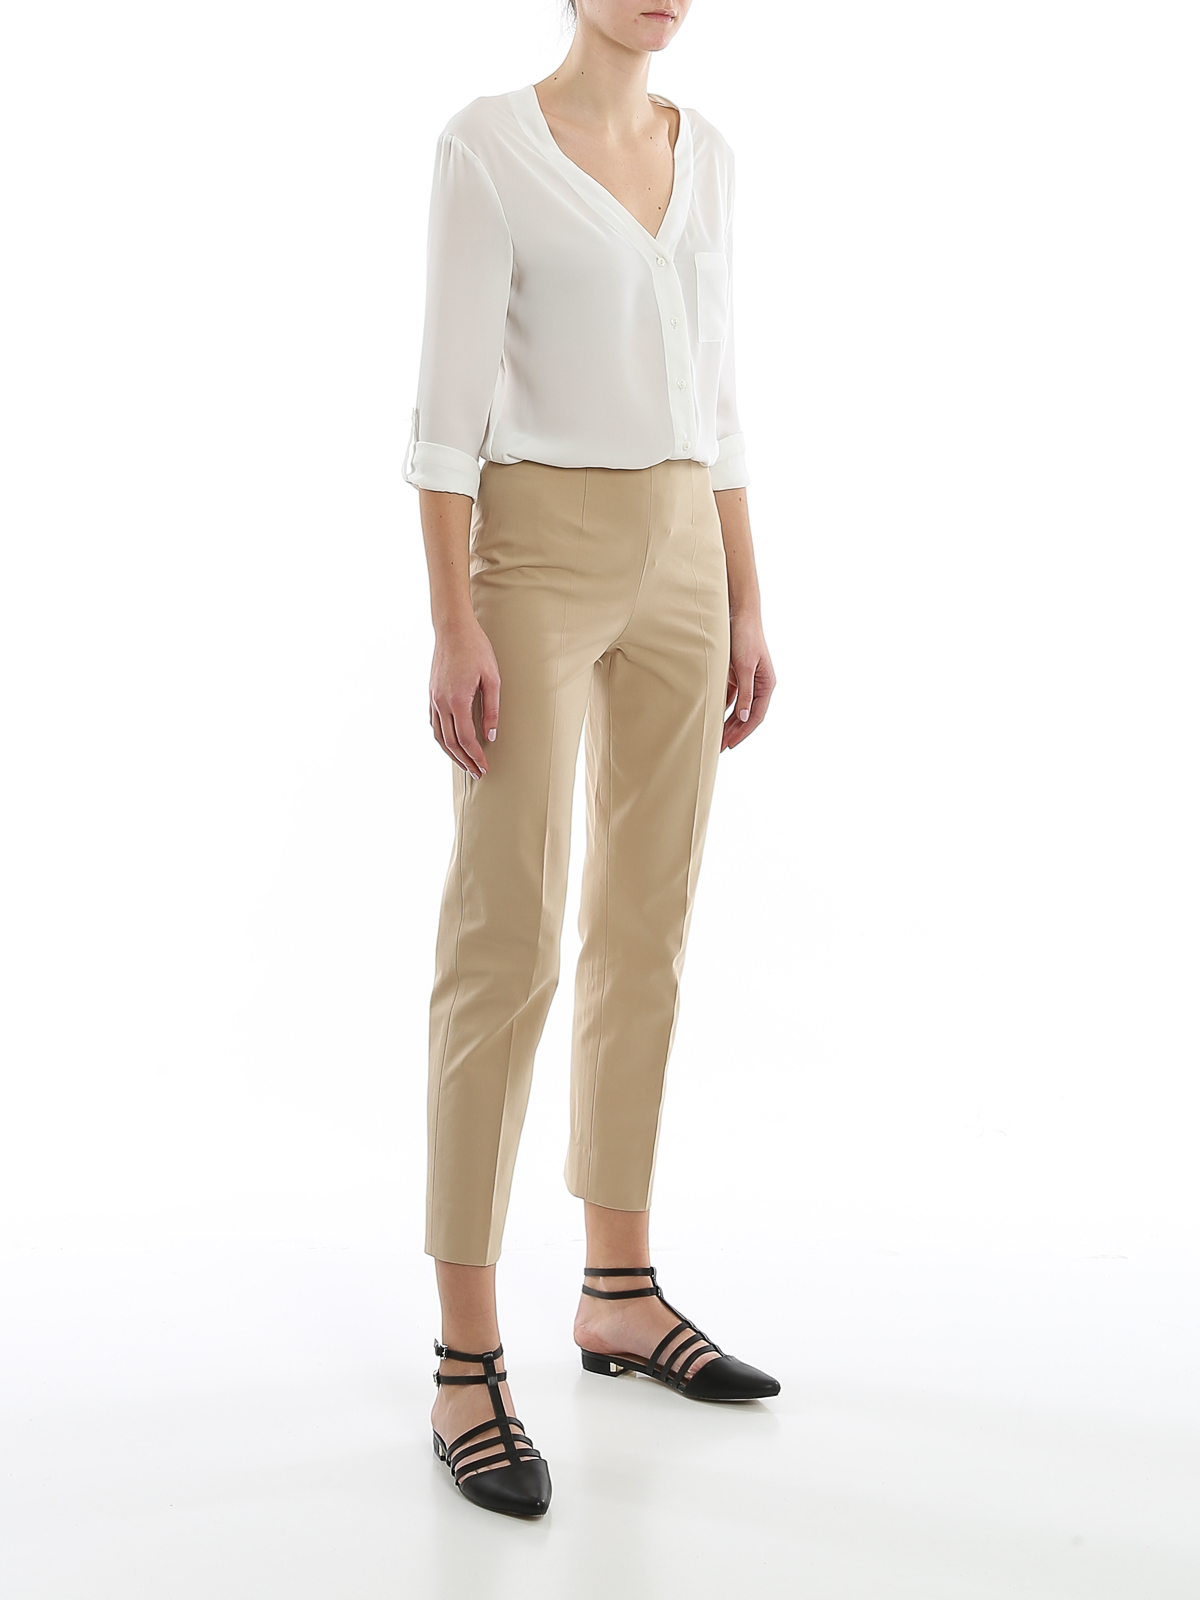 UNICOR Store: Yellow Elastic Waist Trousers without Pockets